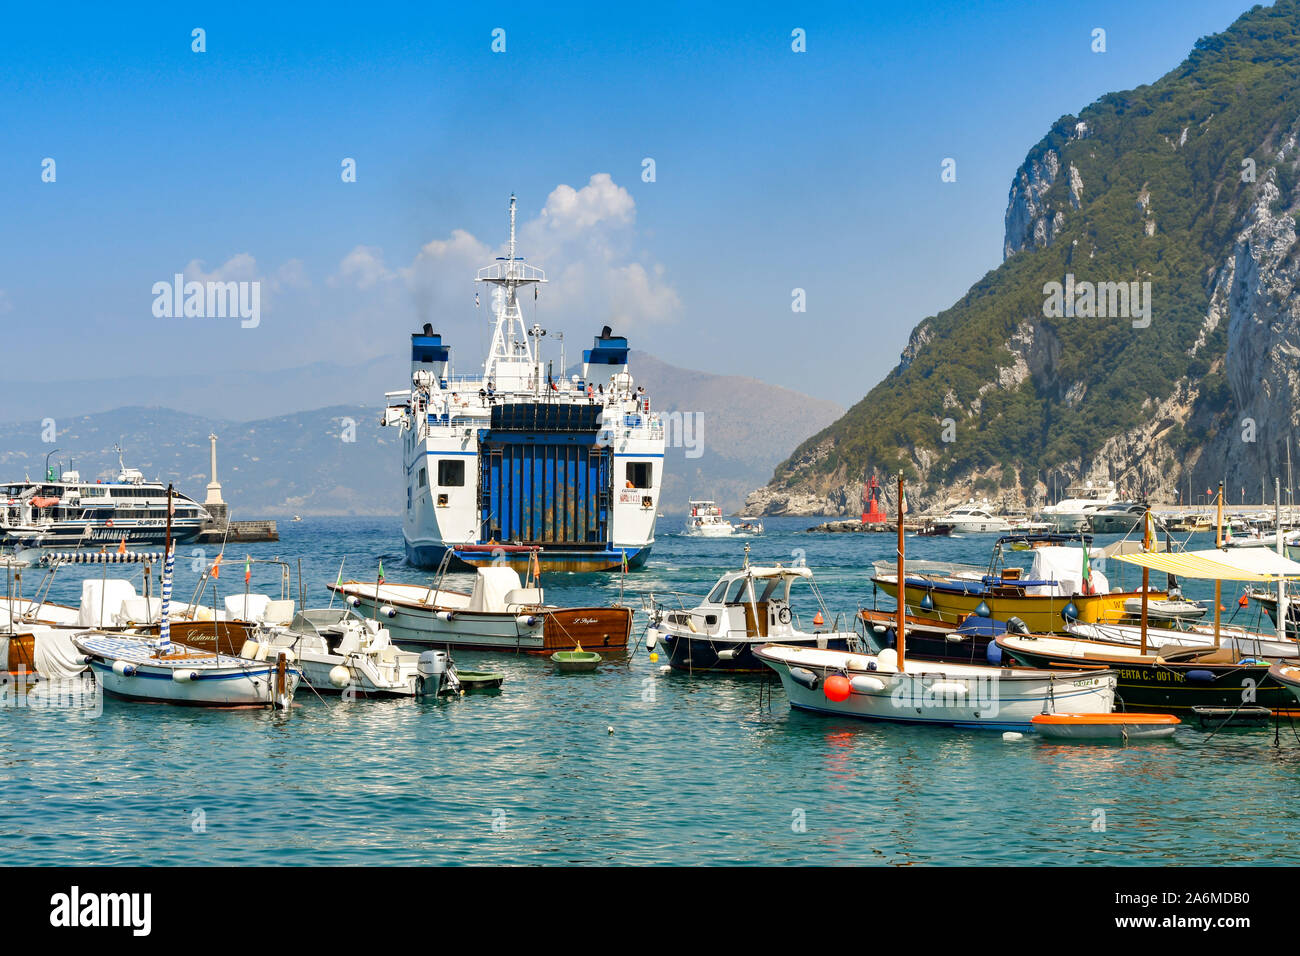 ISLE OF CAPRI, ITALY - AUGUST 2019: Large car and passenger ferry departing harbour on the Isle of Capri. Stock Photo